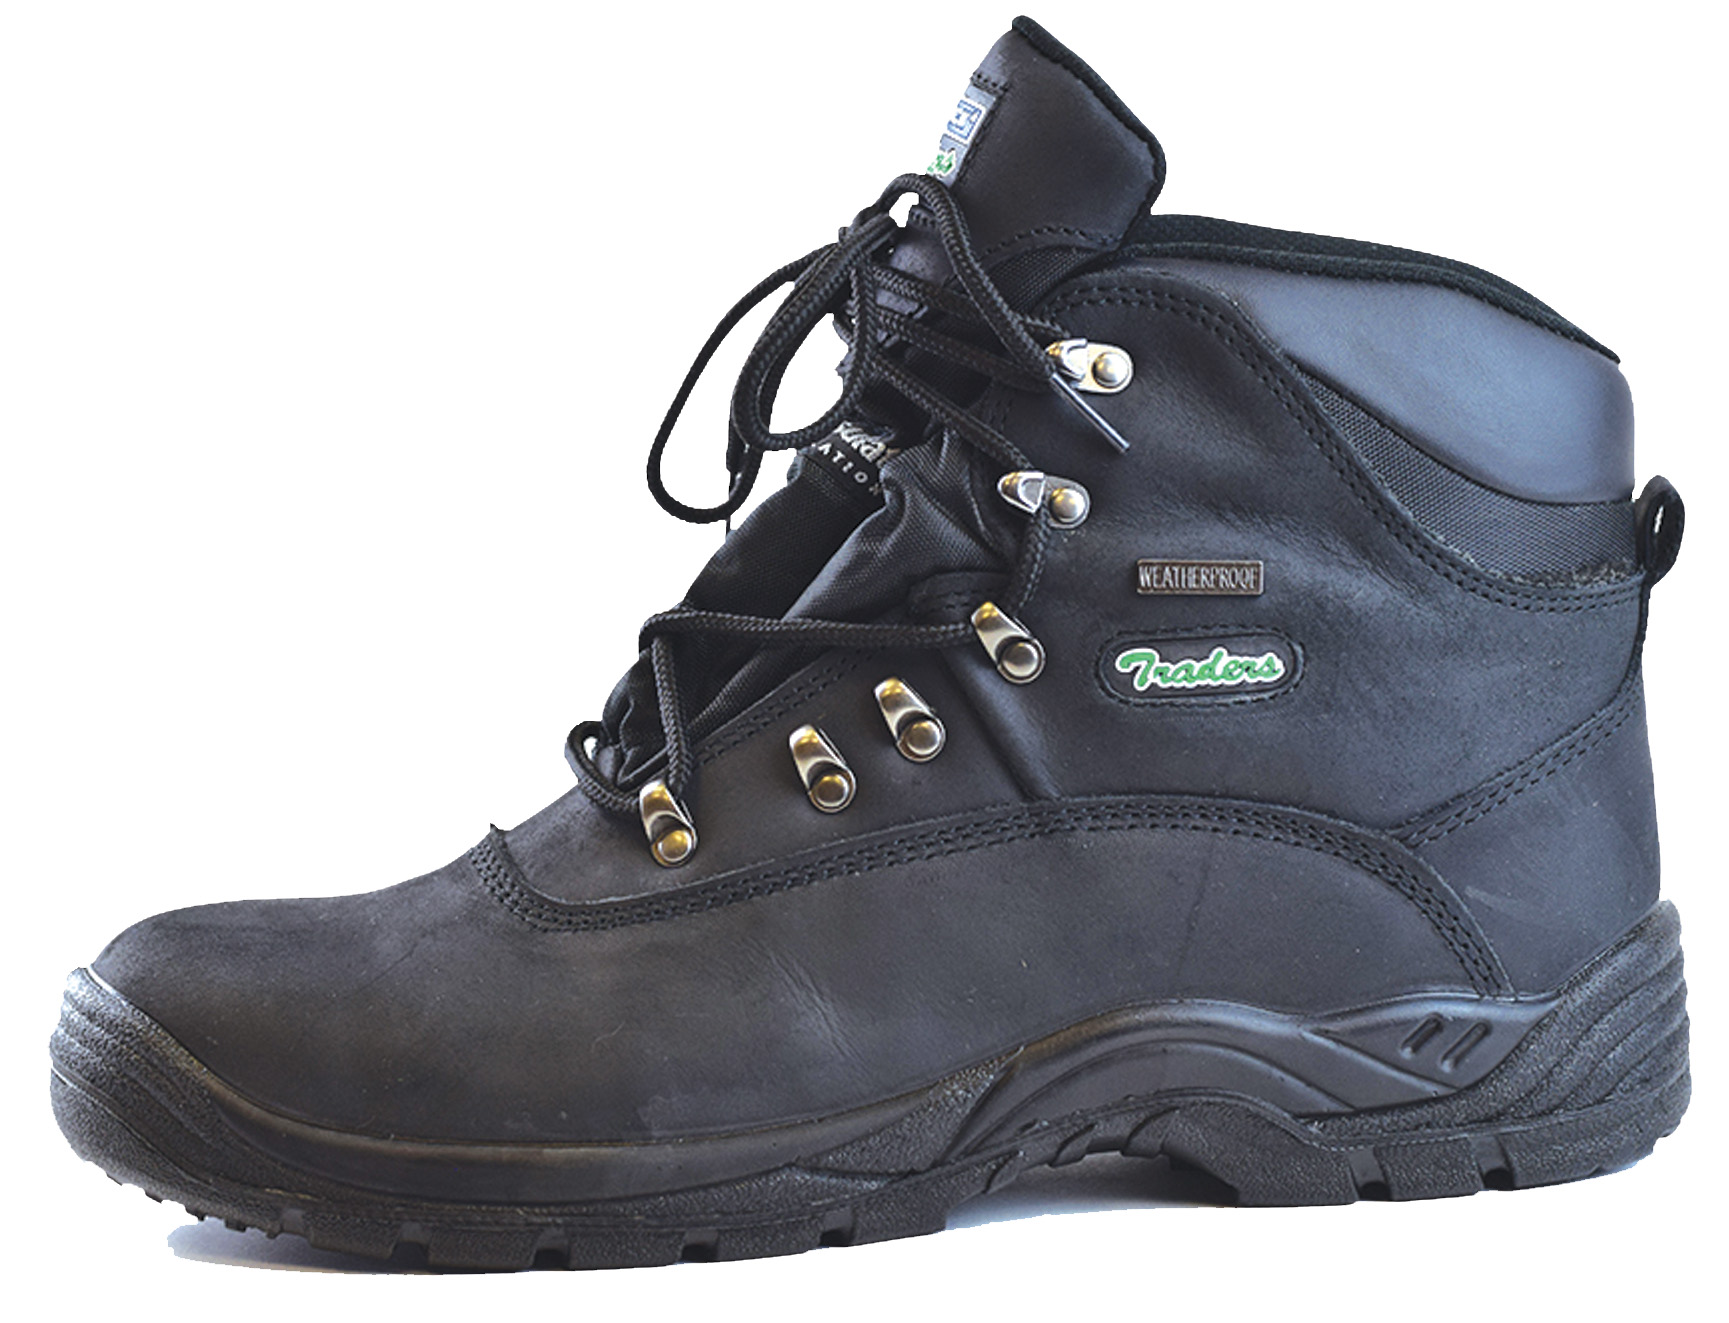 Buy > hiking boots with steel toe > in stock